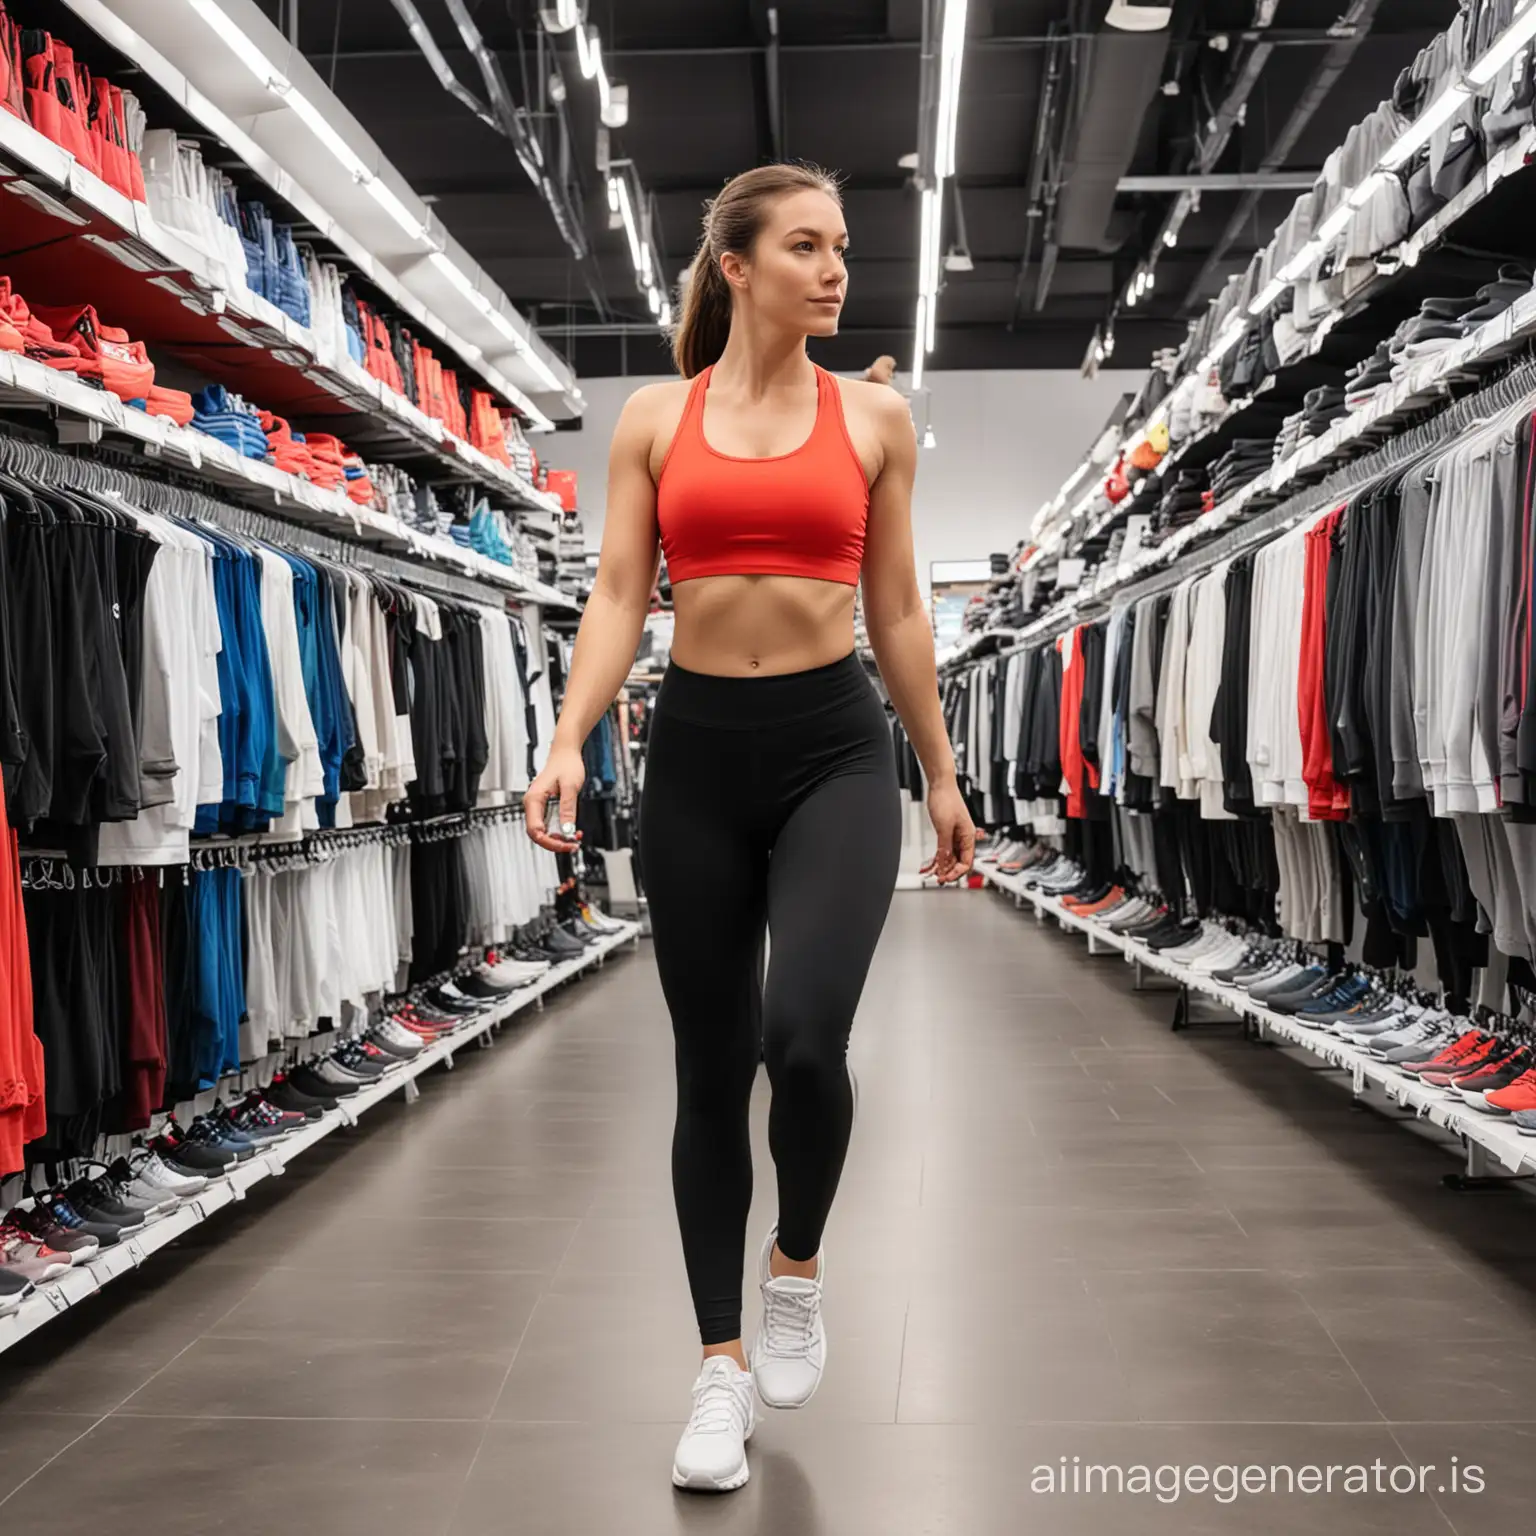 Thirty years old female in sporty outfit walking in a sport store leggings hanging everywhere